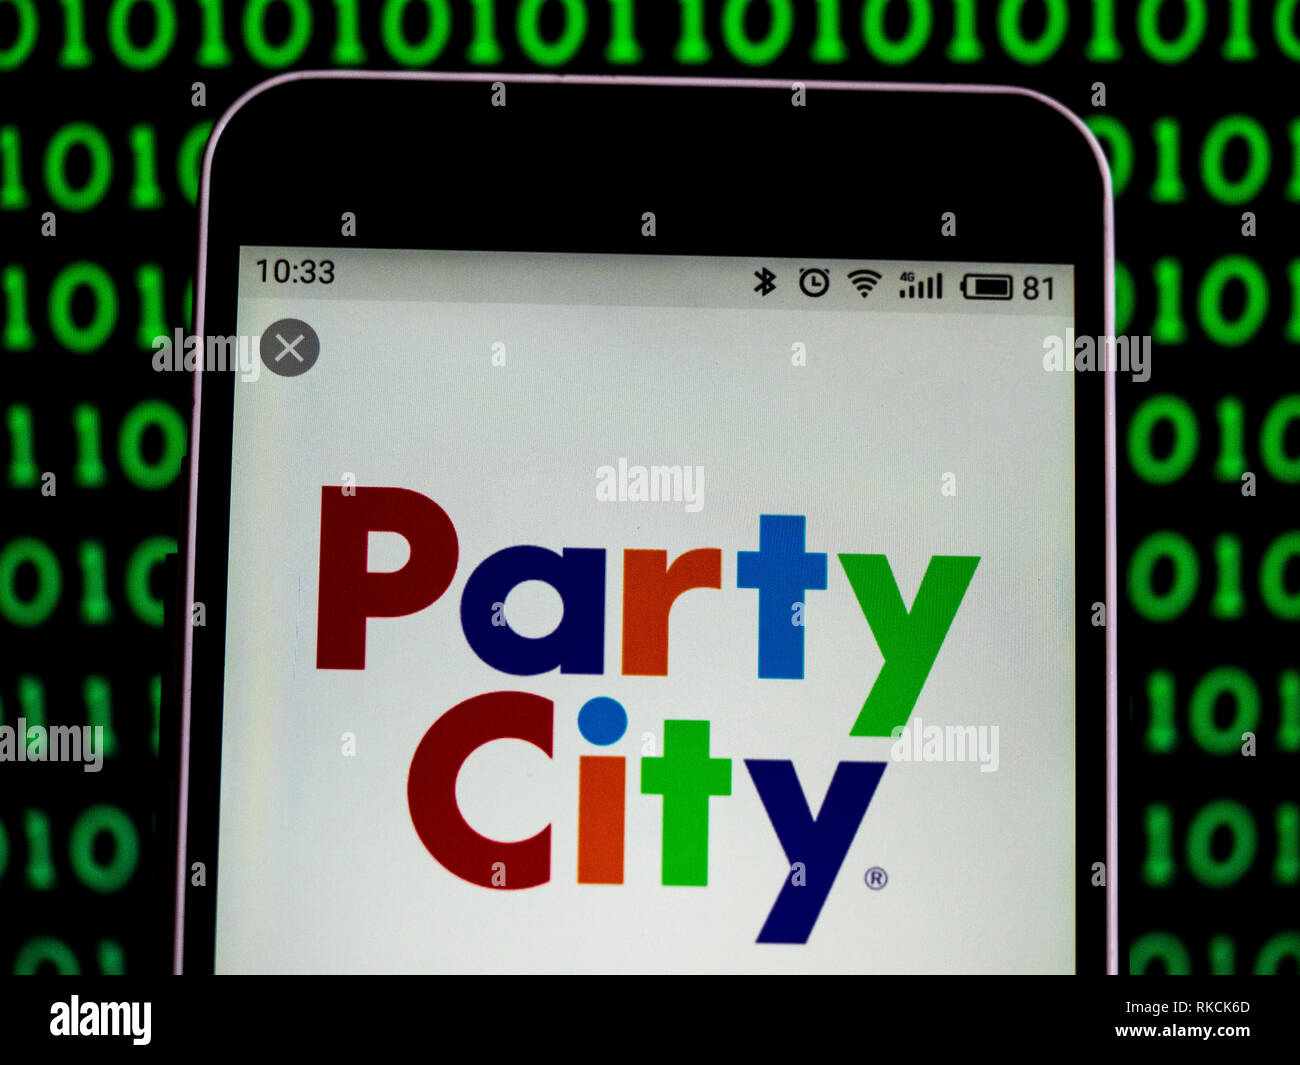 Party City Retail chain company  logo seen displayed on a smart phone. Stock Photo